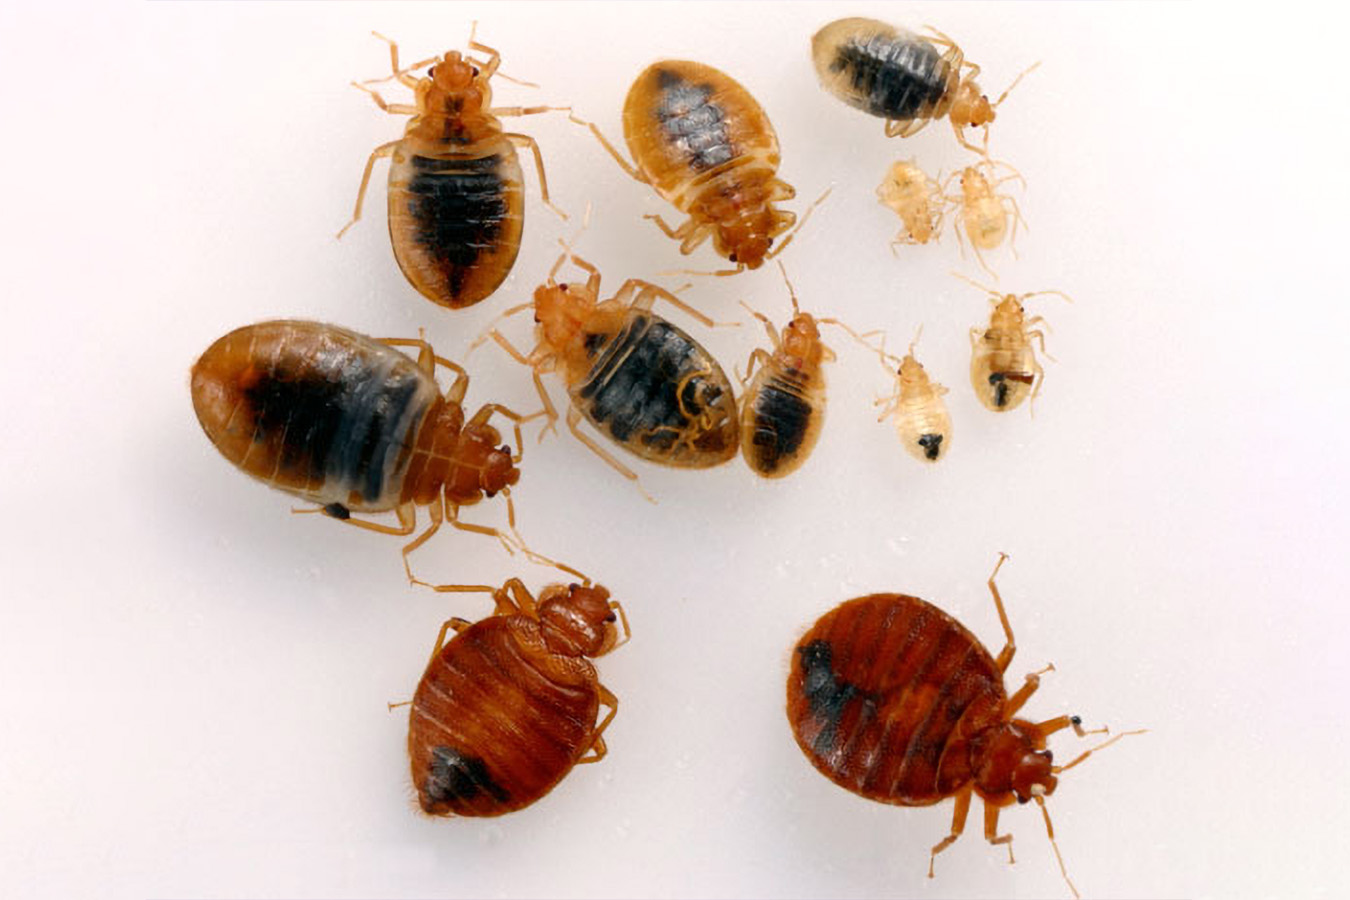 The Life Cycle Of Common Household Pests And How To Interrupt It